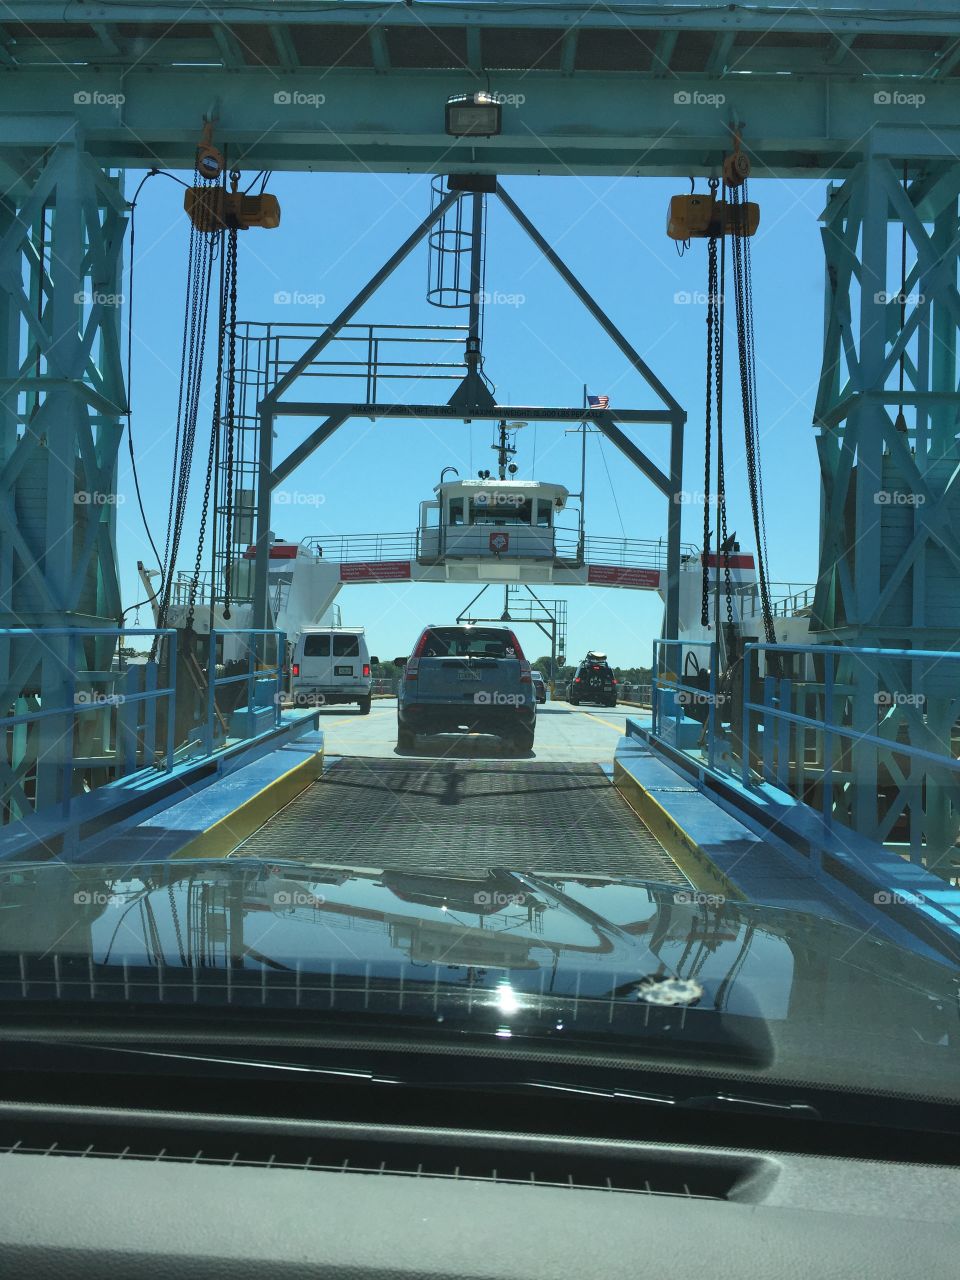 Commuting on a ferry boat